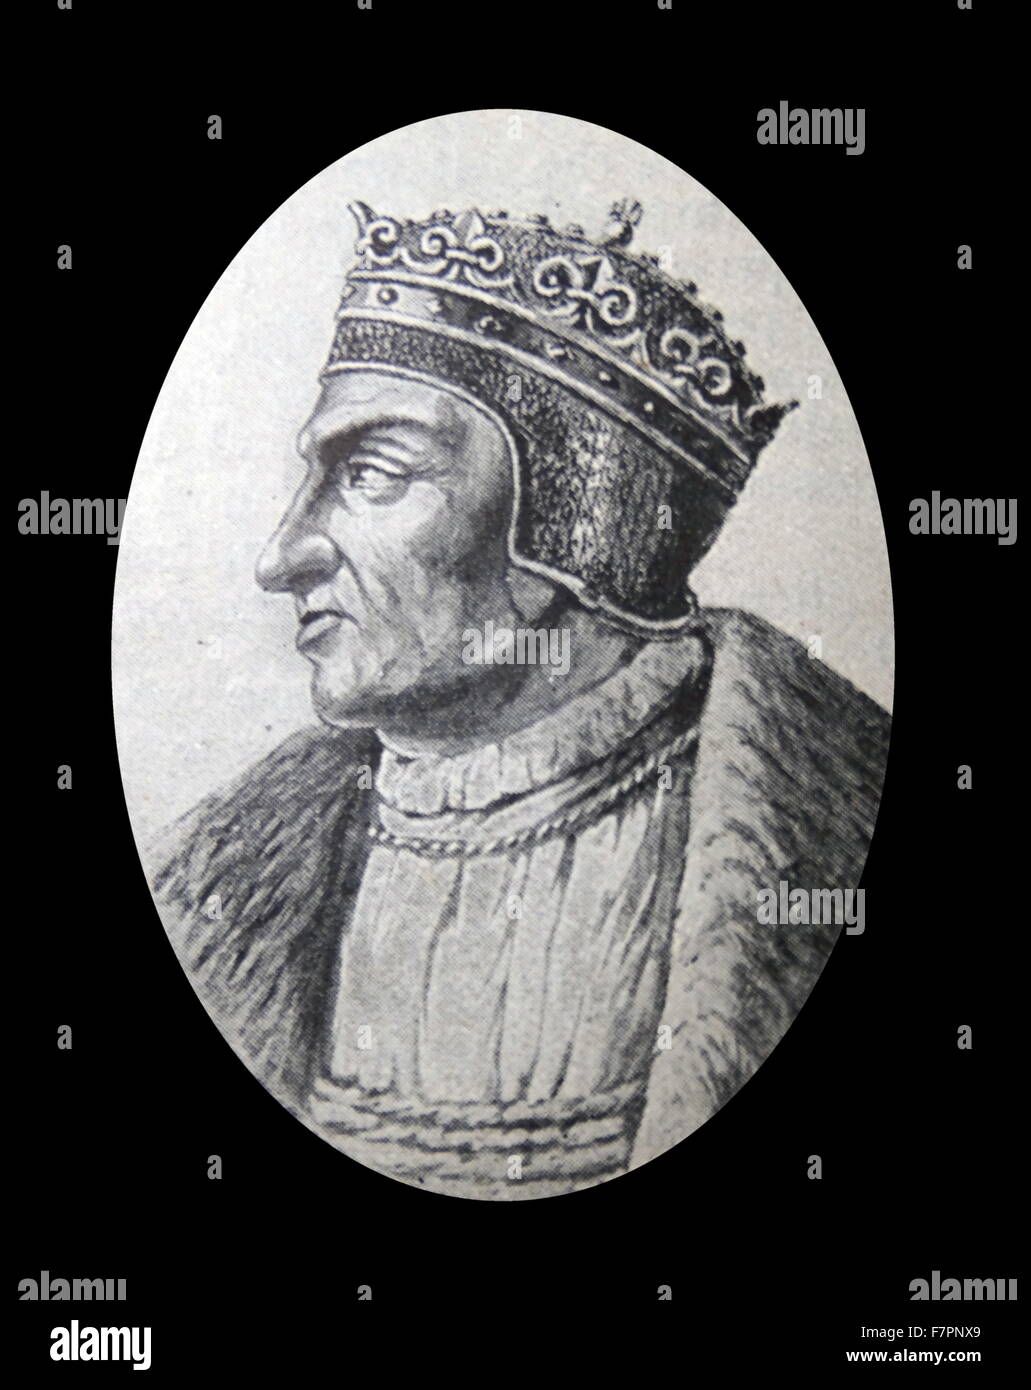 Engraving depicting Sigismund I the Old (1467-1548) of the Jagiellon dynasty, reigned as King of Poland and also as the Grand Duke of Lithuania. Dated 16th Century Stock Photo